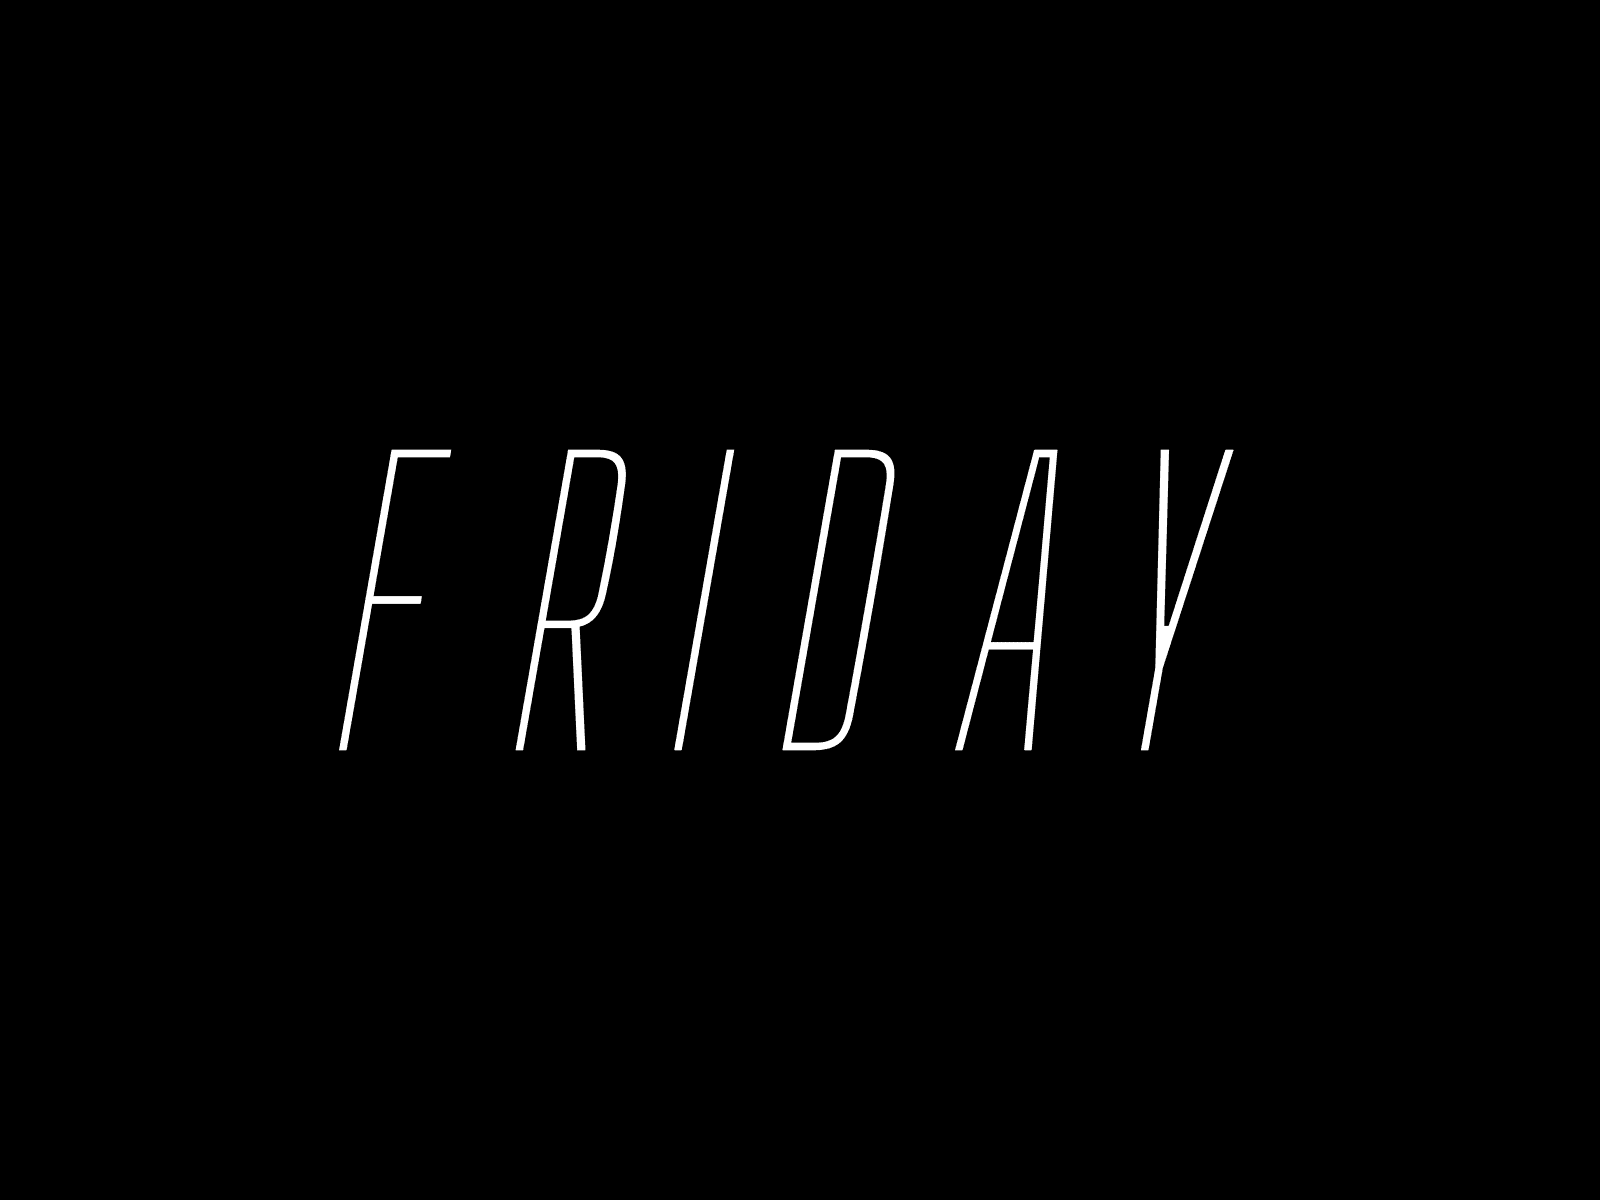 It's Friday animation typography